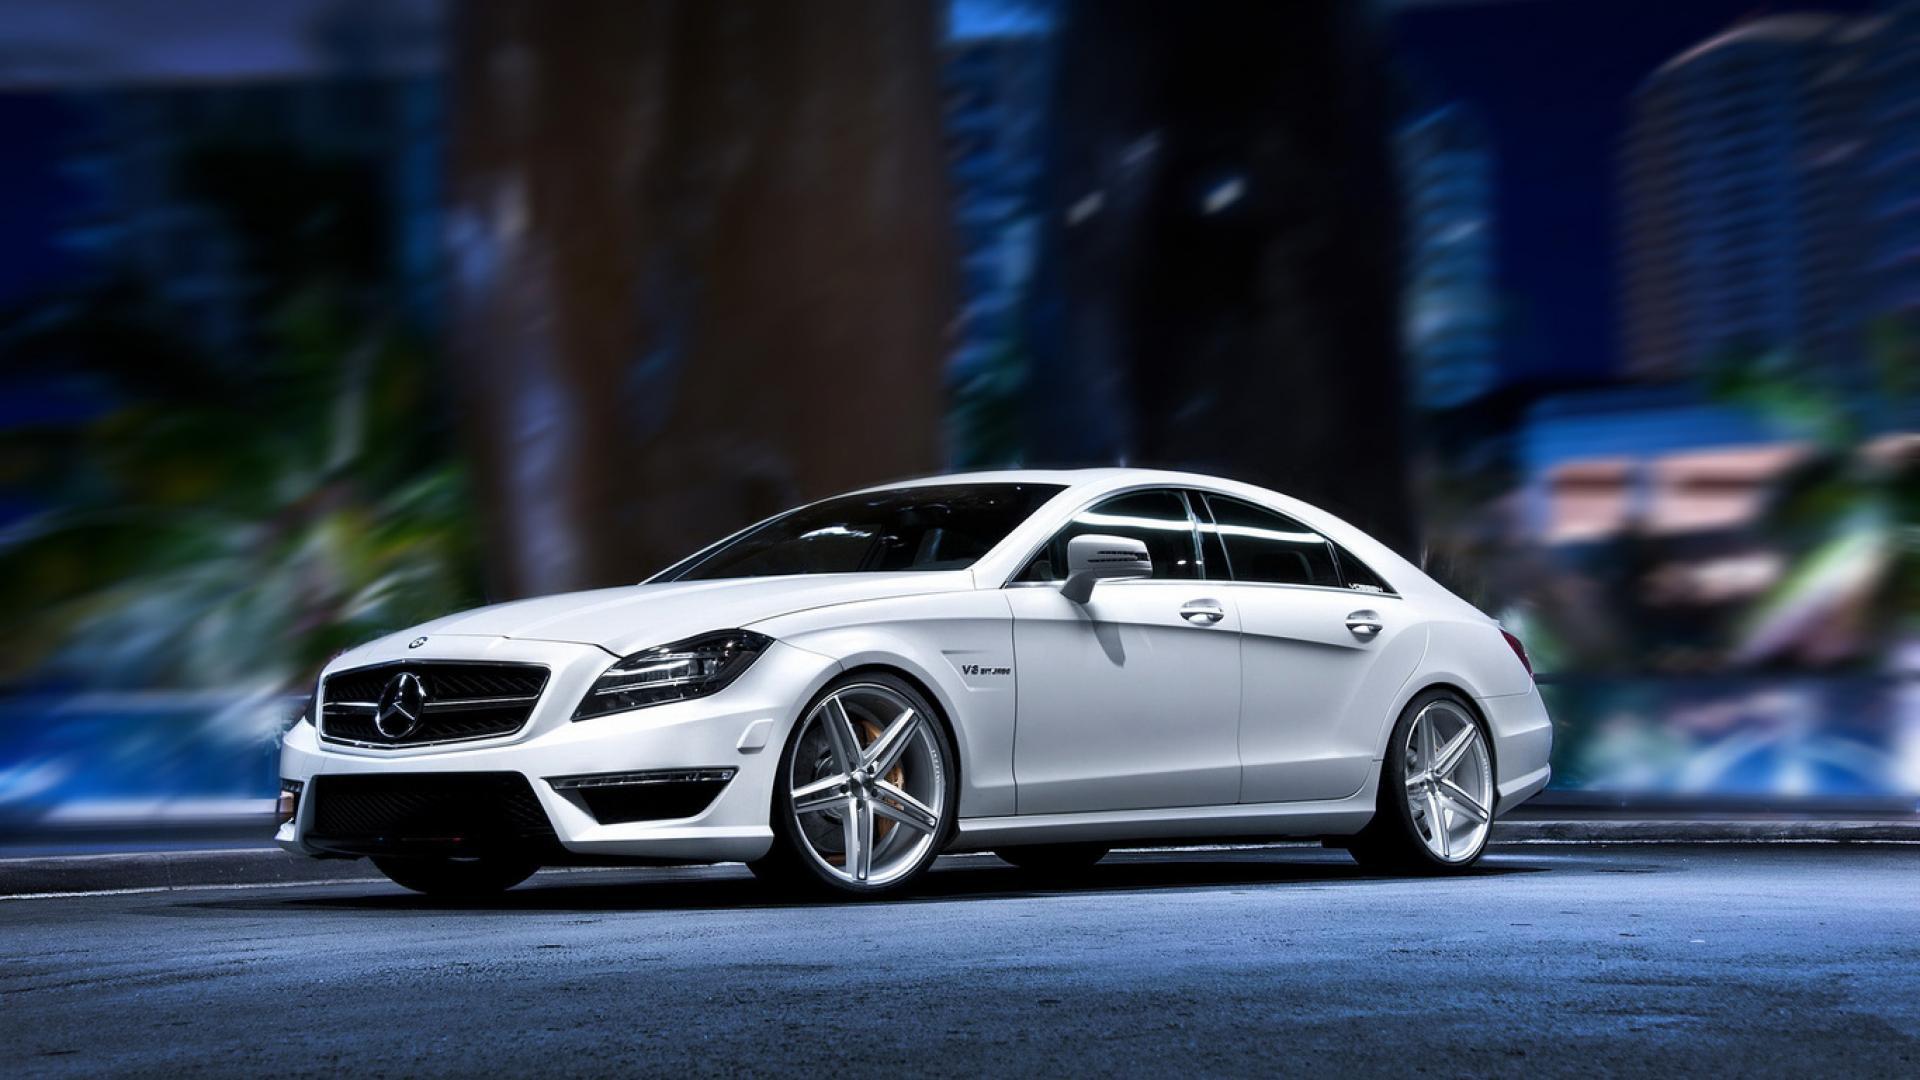  Free download Mercedes Benz Wallpapers 1920x1080 for your Desktop 